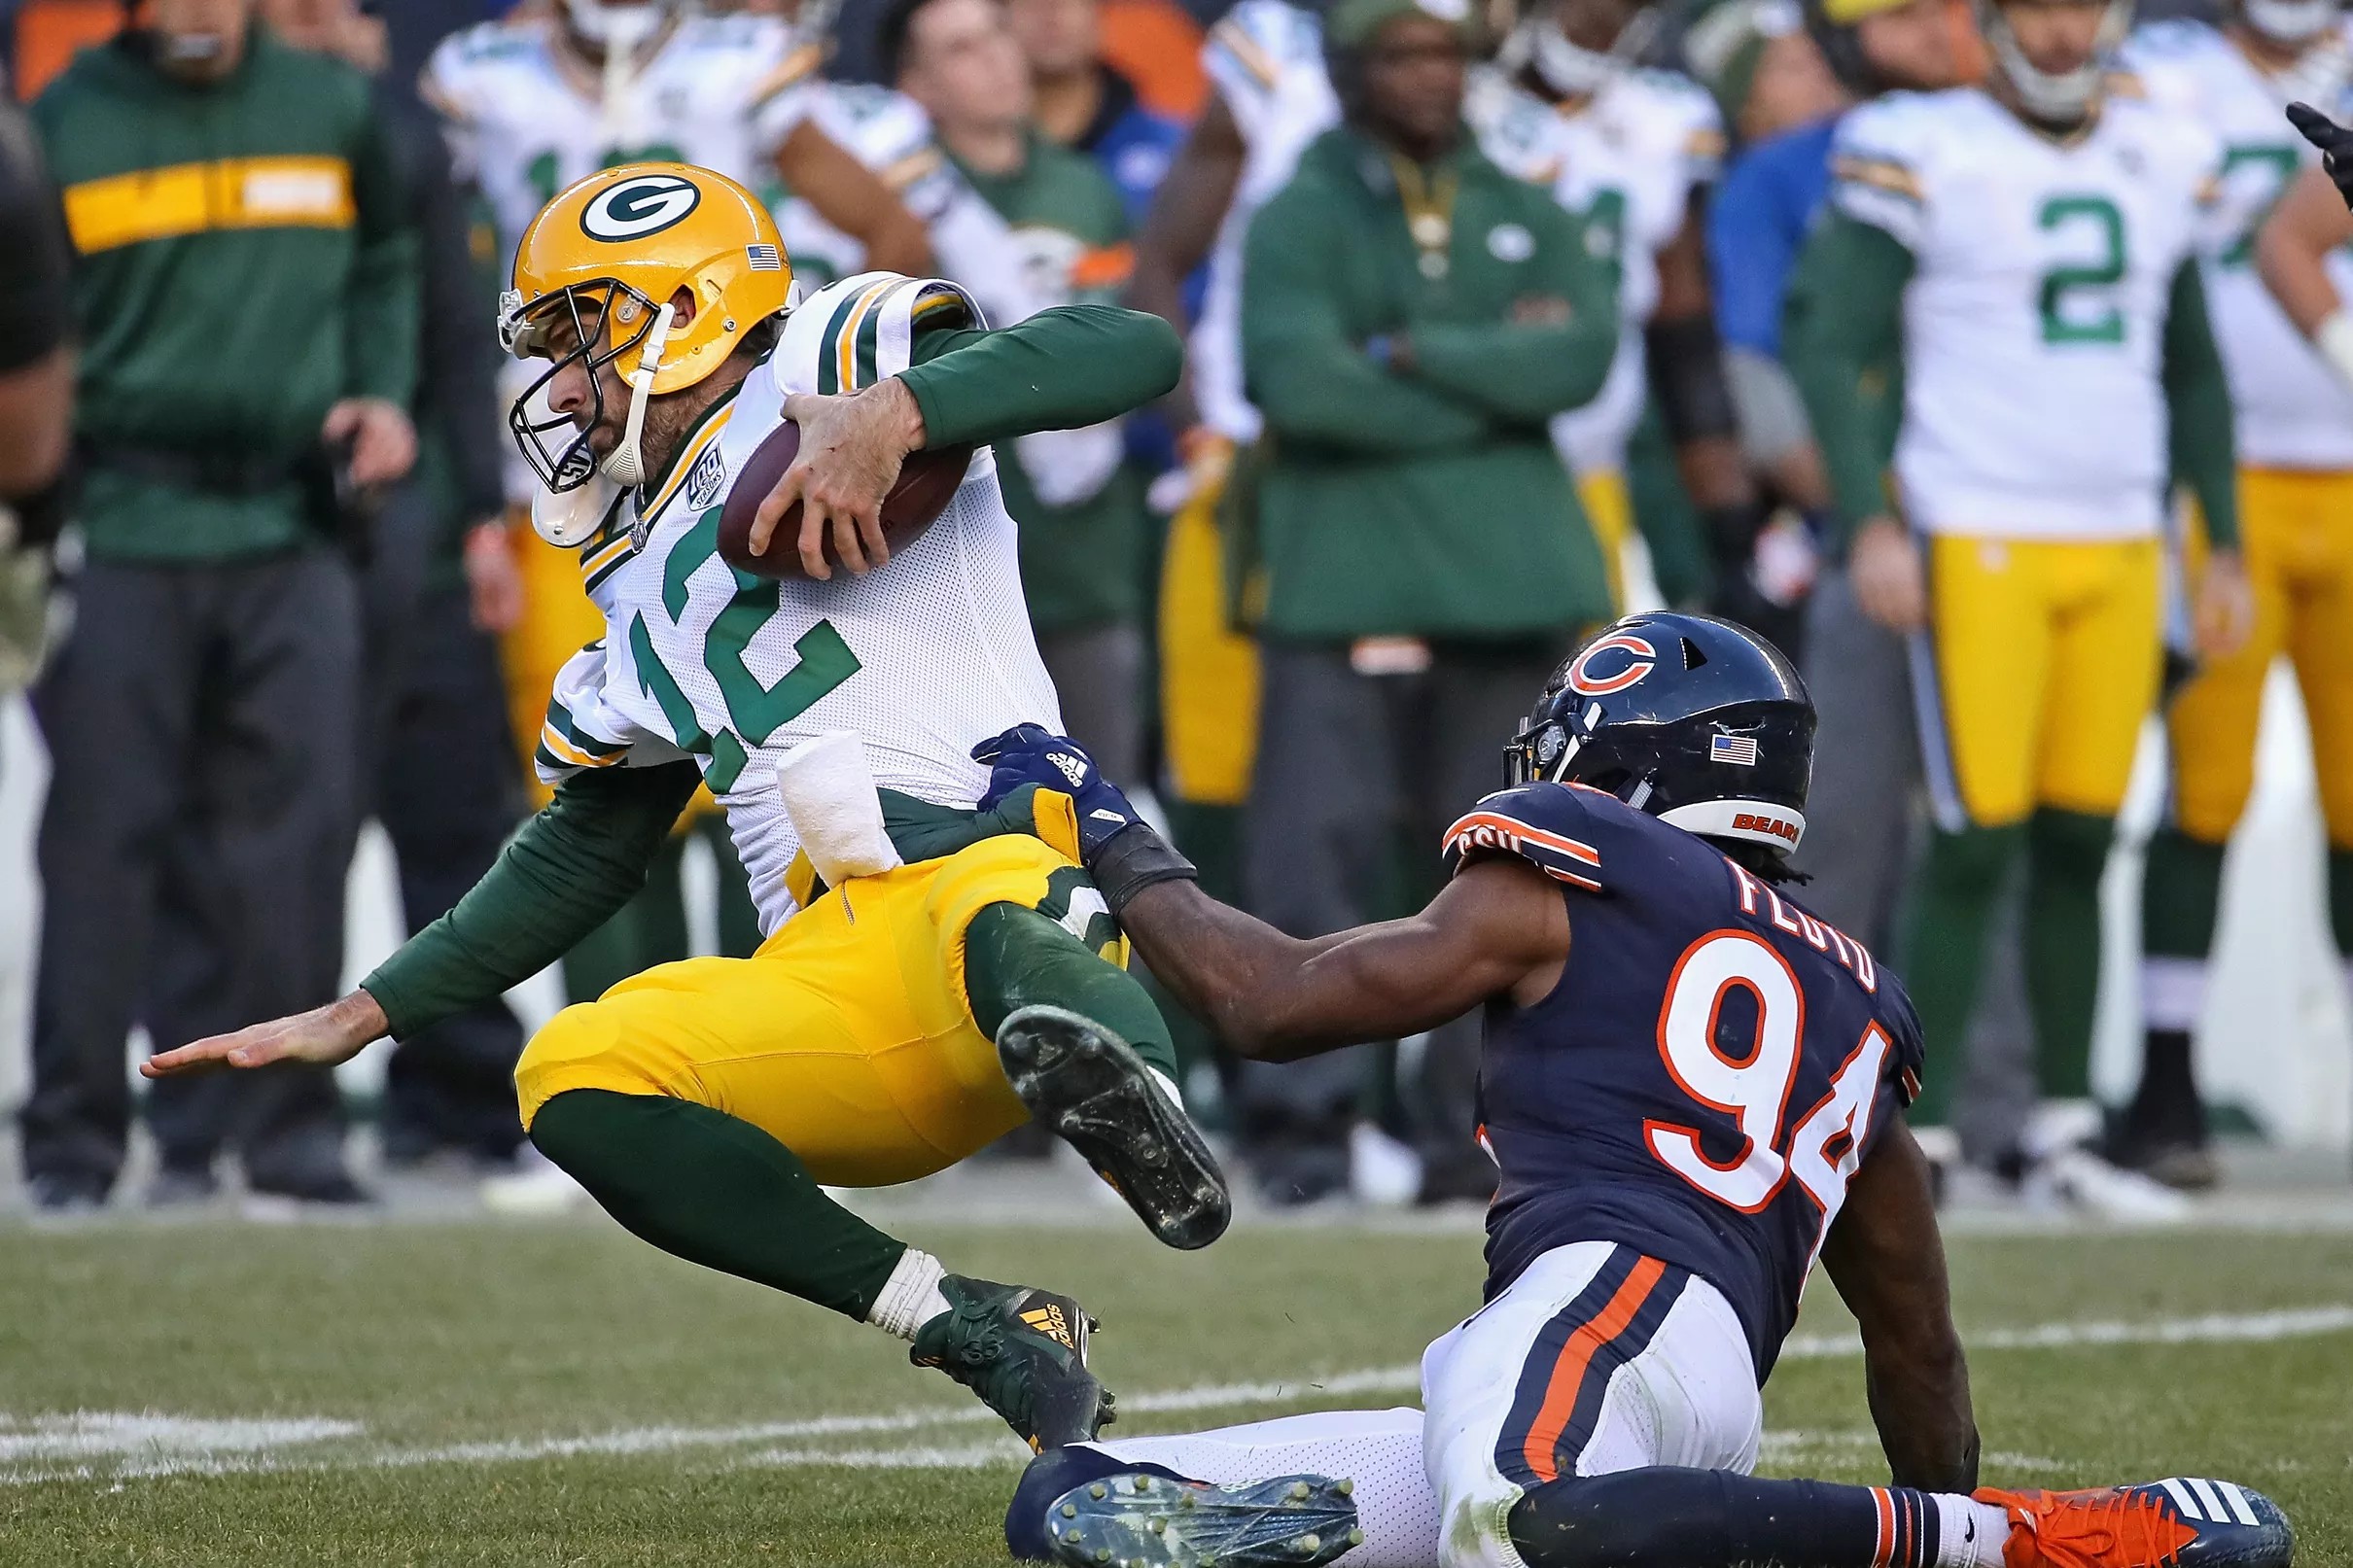 Bears vs. Packers Notes from a 2417 divisionclinching victory